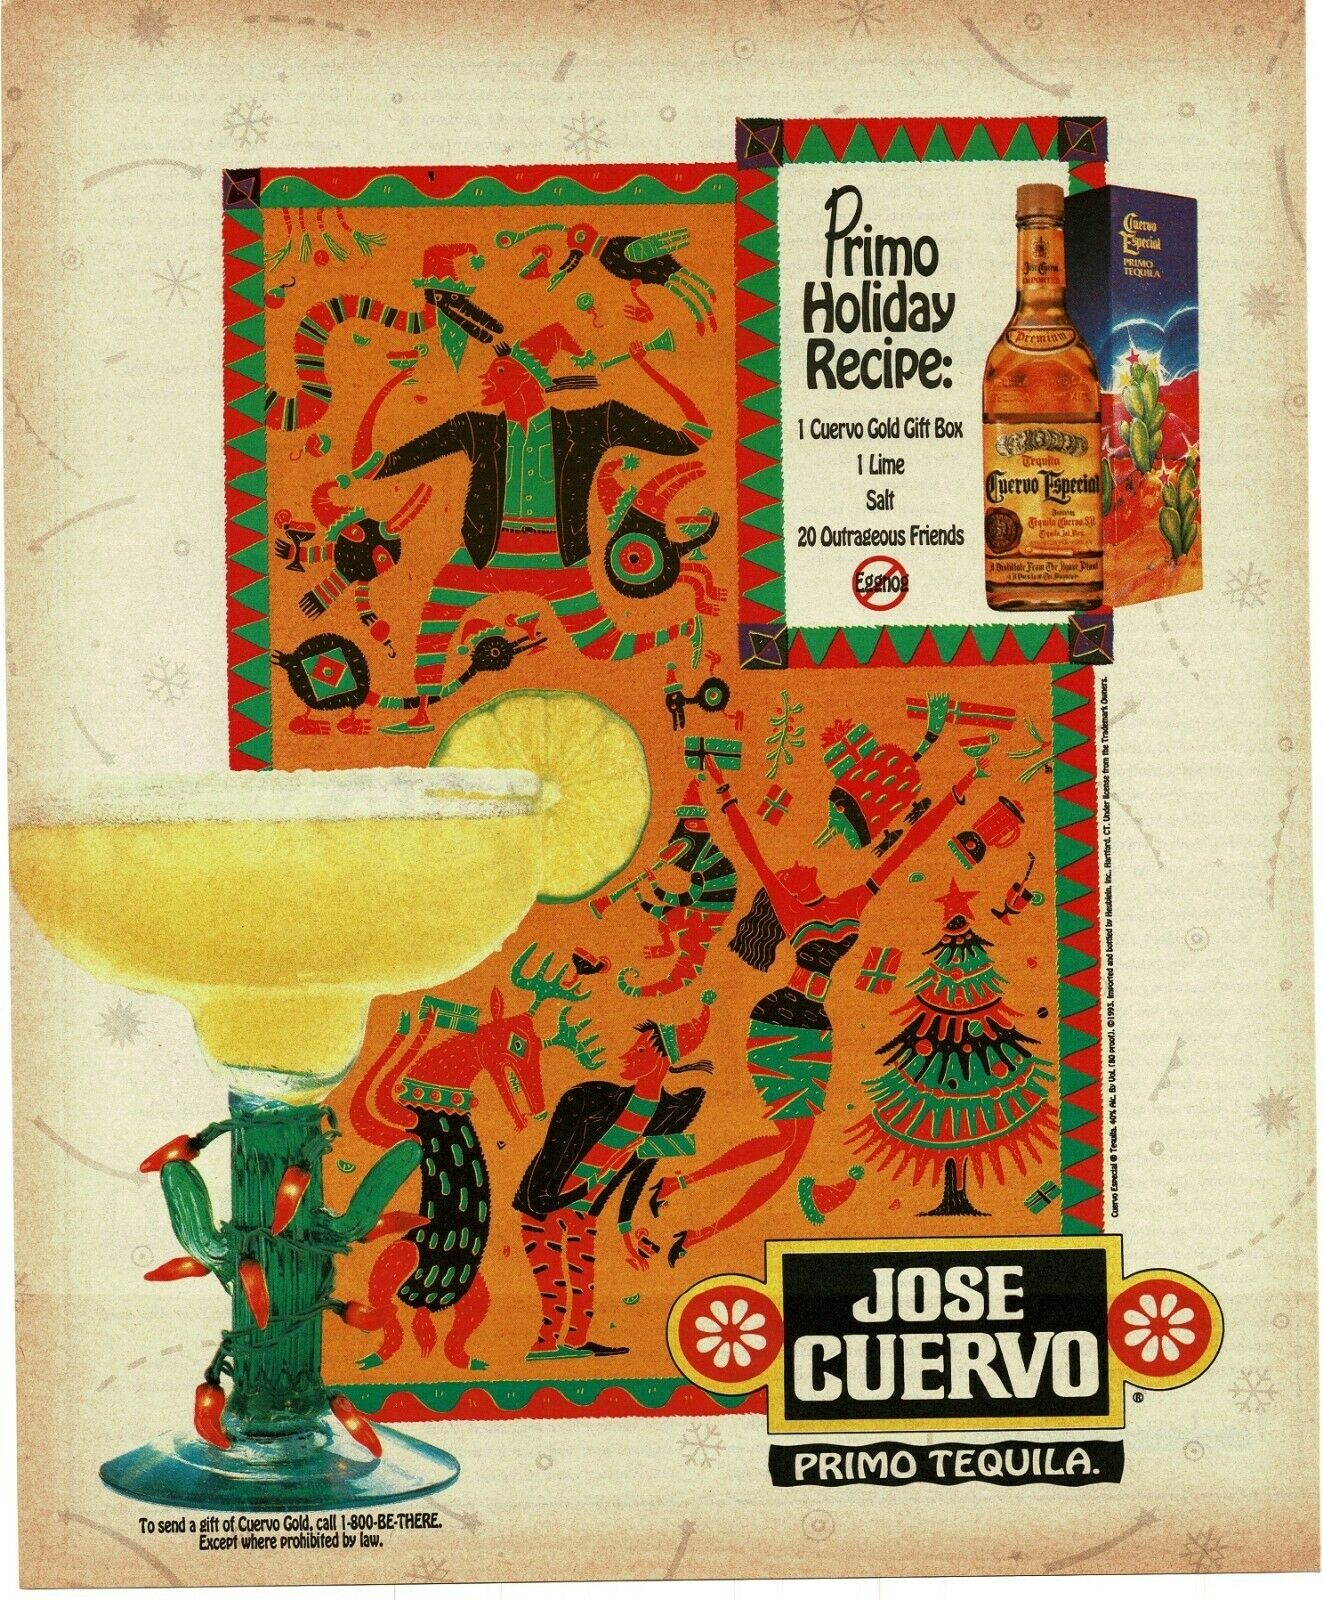 1994 Jose Cuervo Especial Gold Tequila Christmas Holiday Recipe Vintage Print Ad